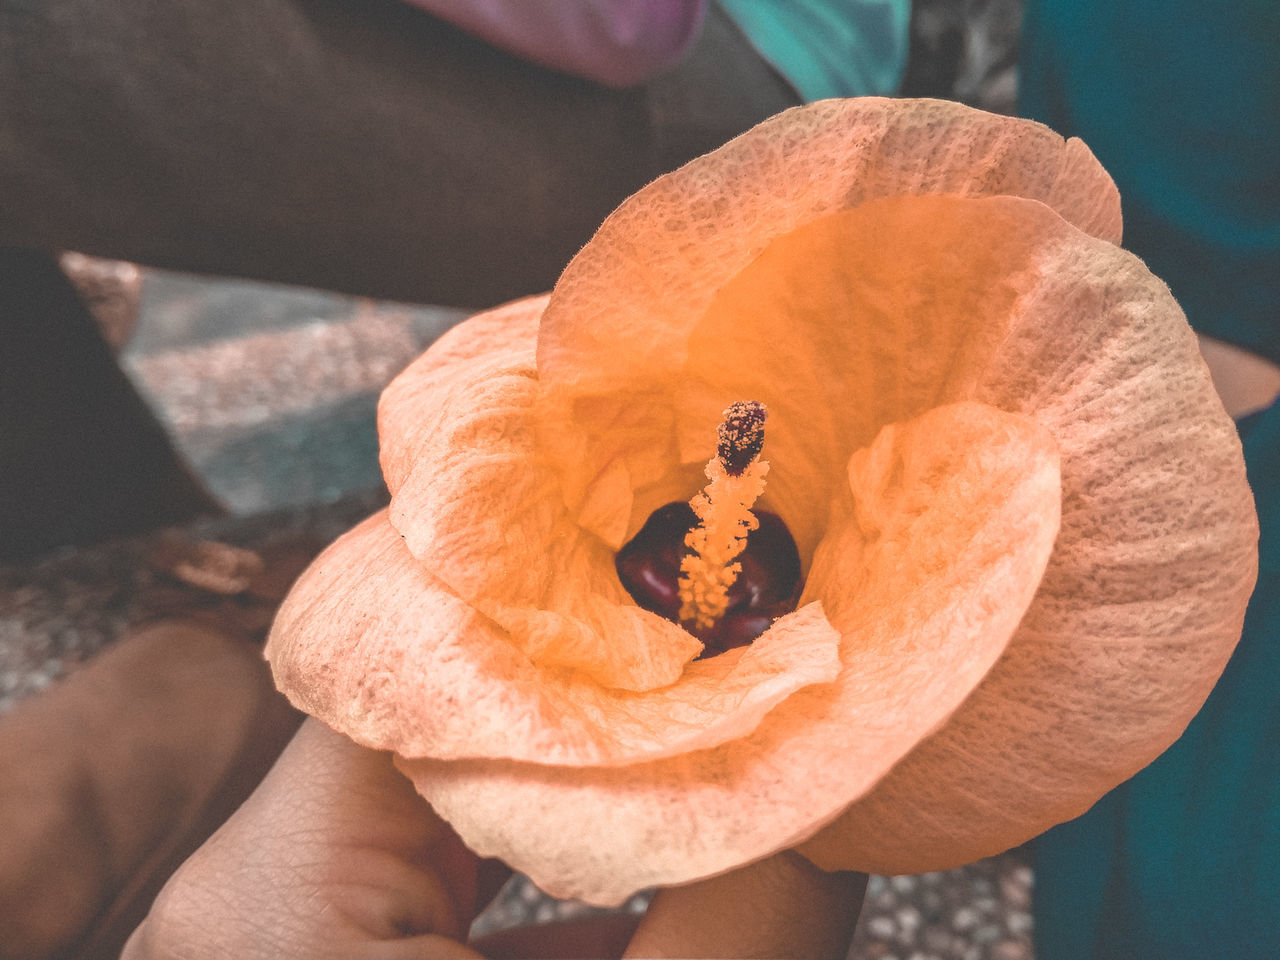 human body part, orange color, human hand, close-up, holding, real people, one person, hand, focus on foreground, unrecognizable person, freshness, day, flower, nature, beauty in nature, body part, flowering plant, plant, finger, outdoors, flower head, orange